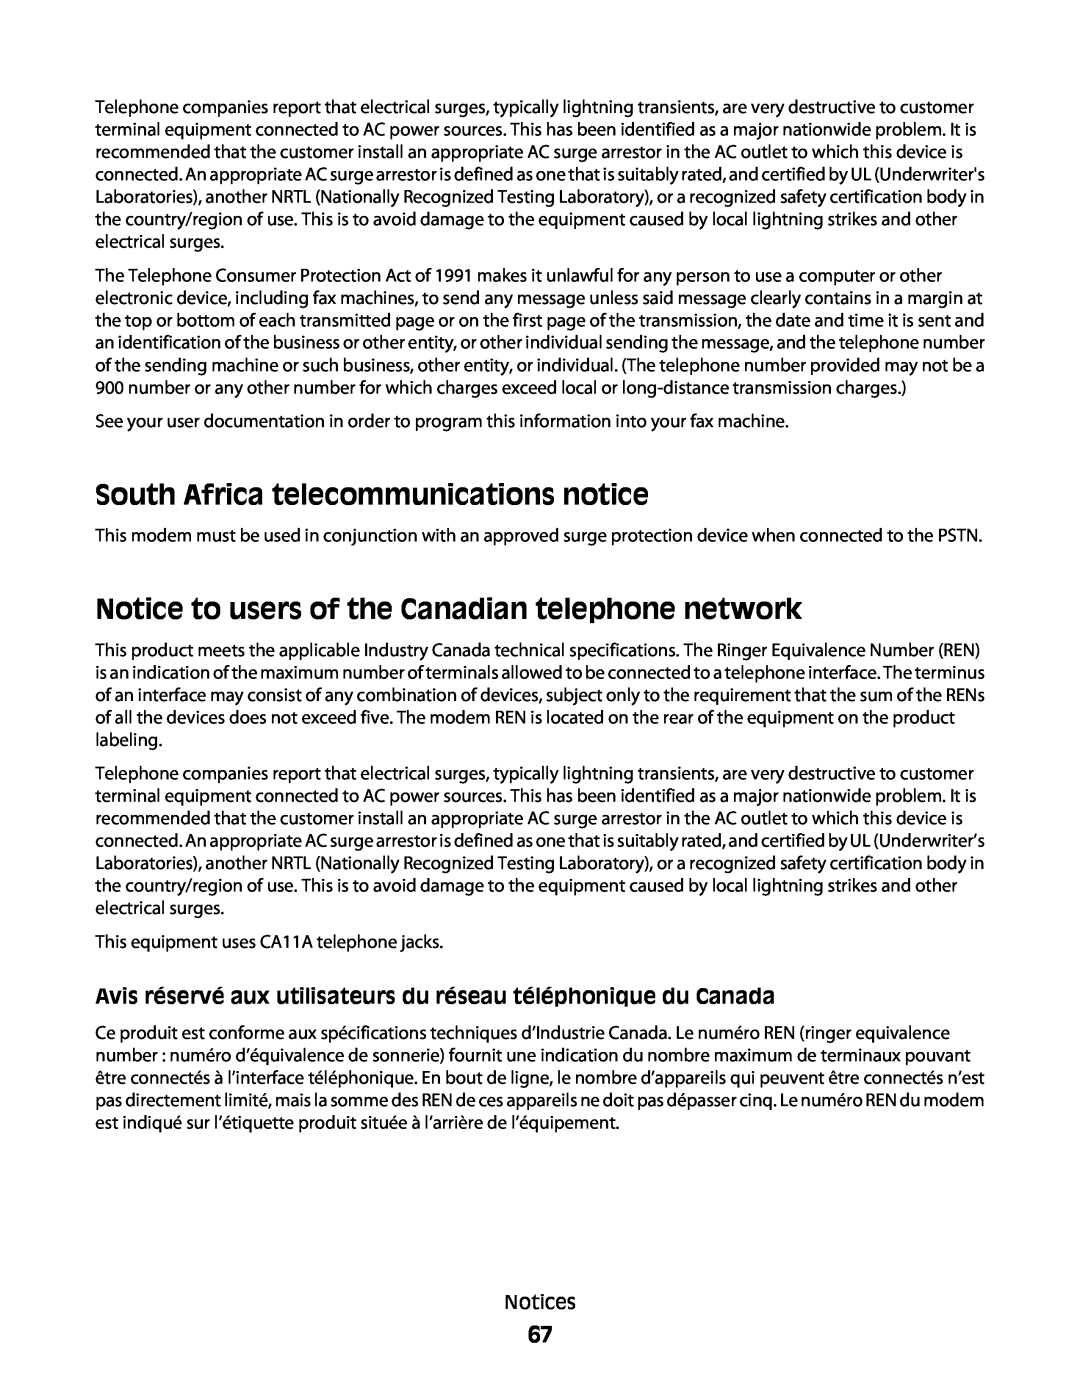 Lexmark 4445, 4433 manual South Africa telecommunications notice, Notice to users of the Canadian telephone network 